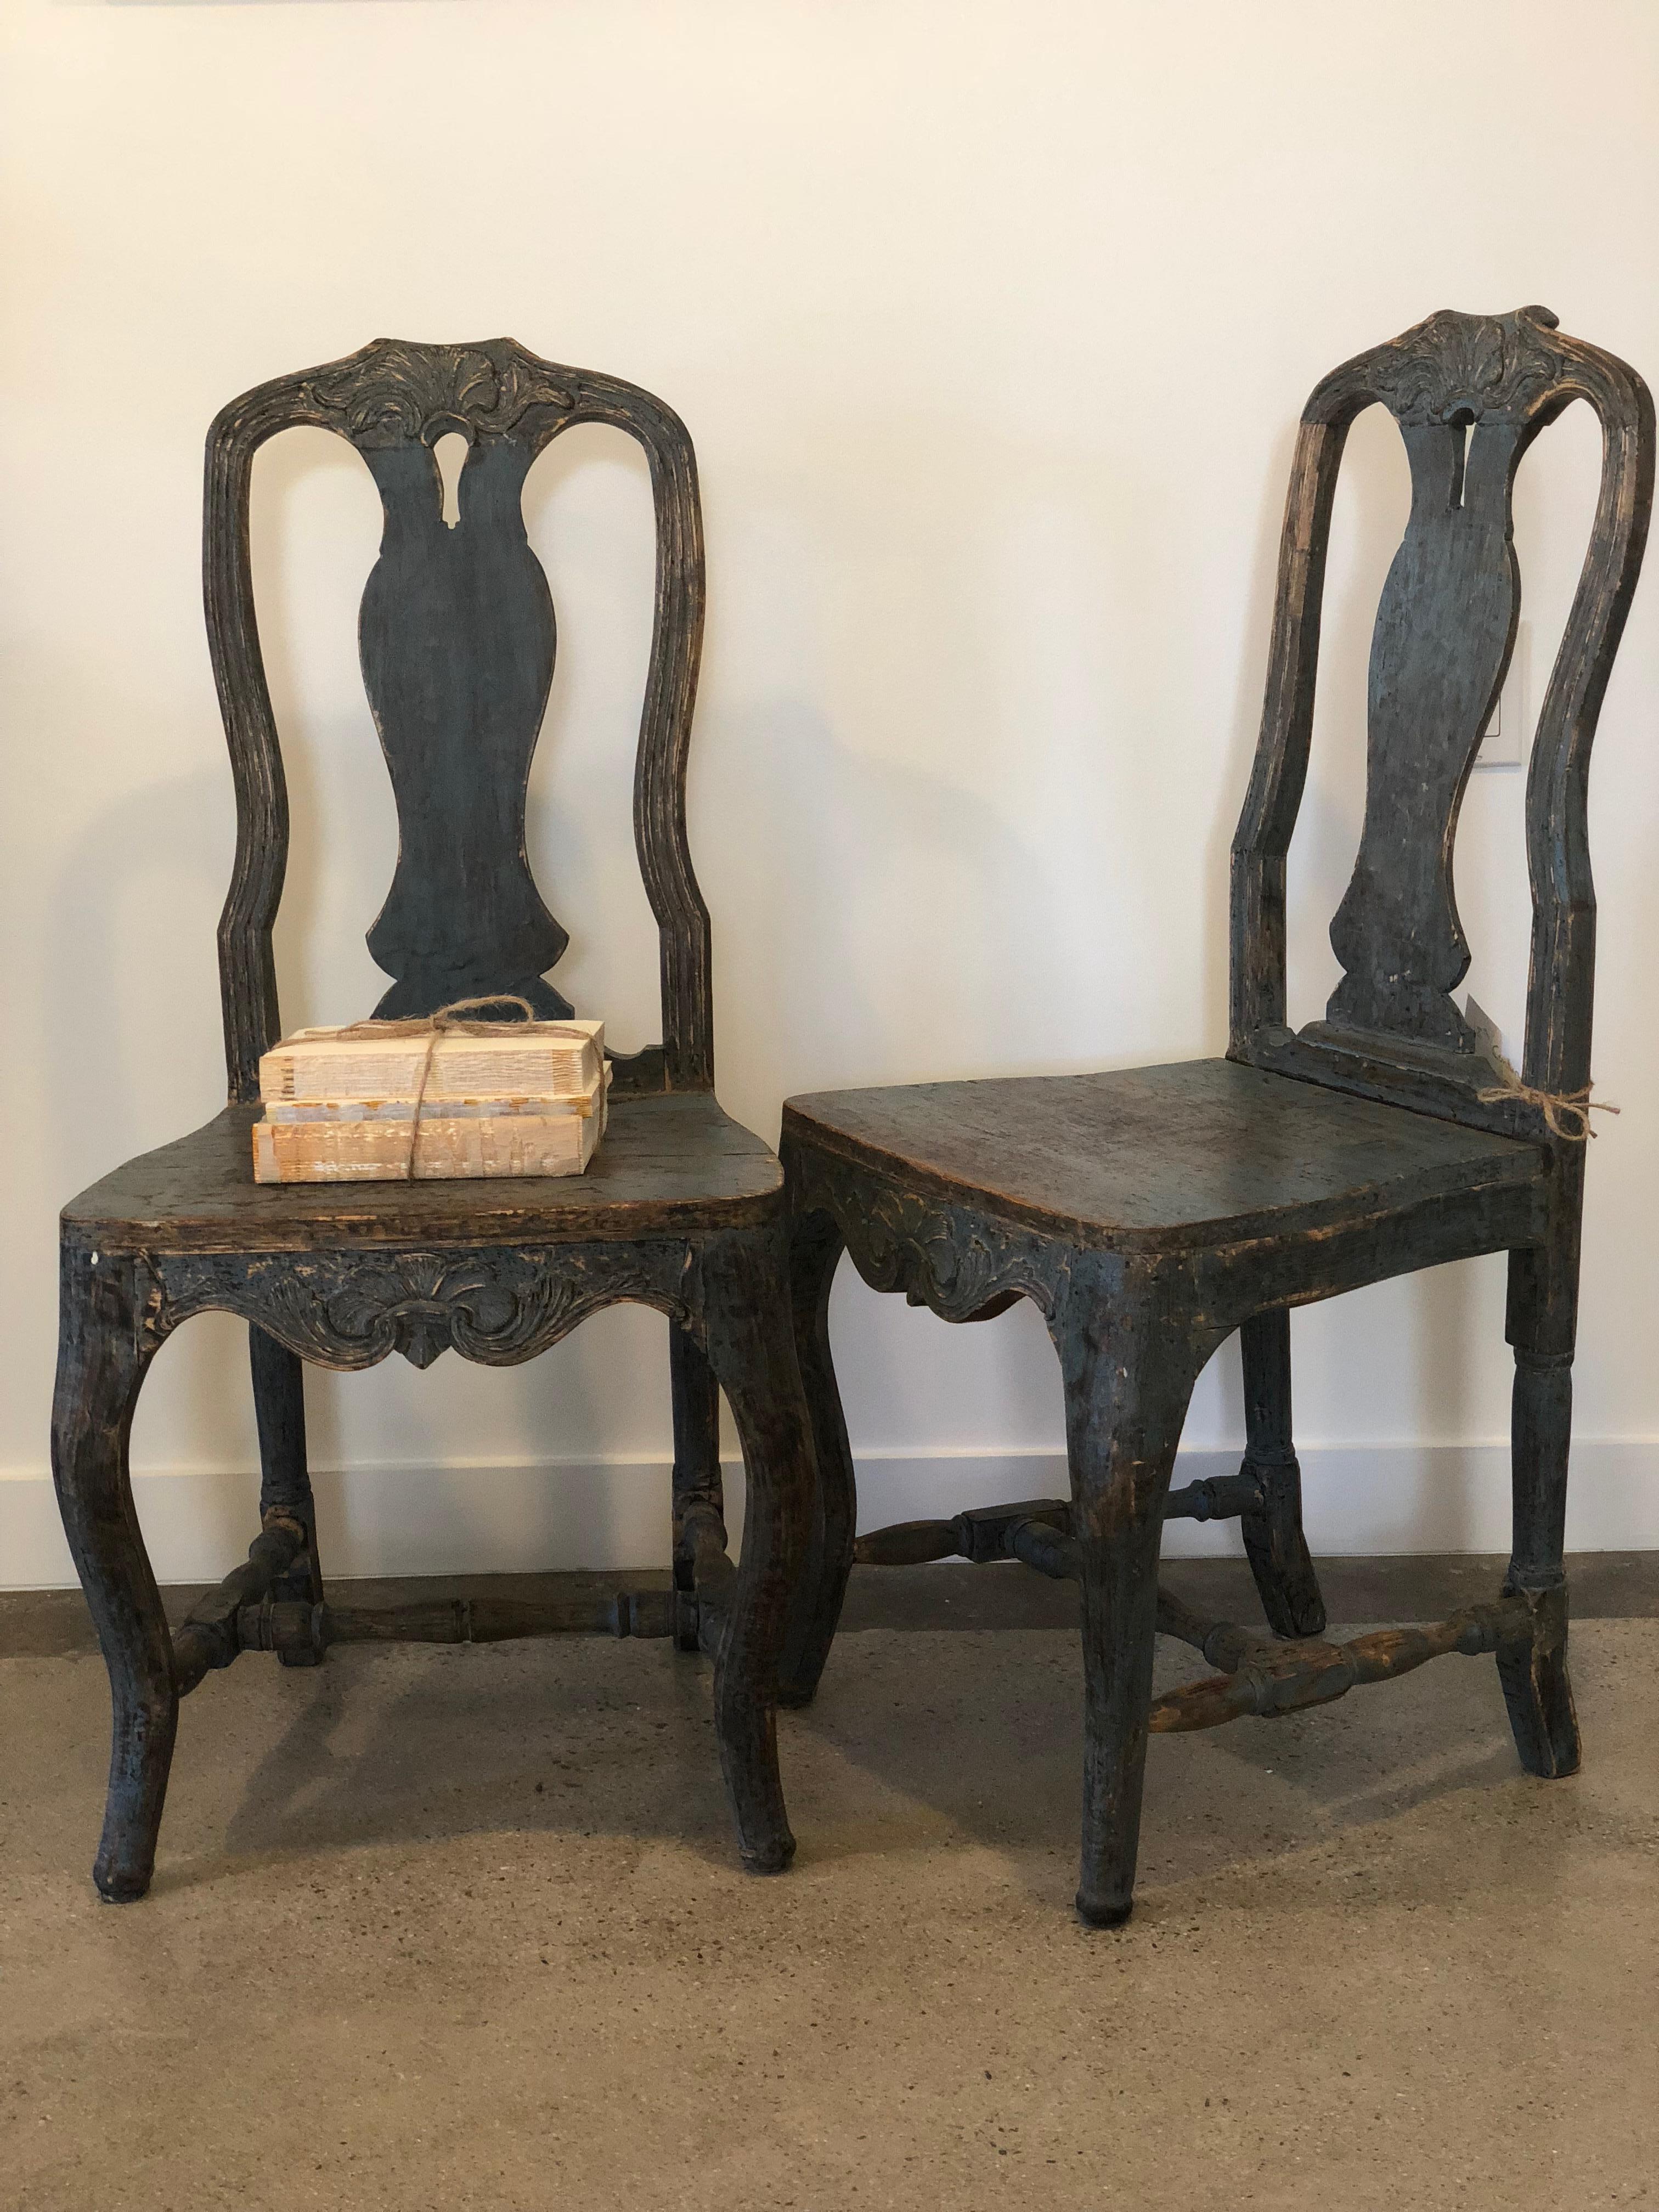 A Swedish Rococo period chair the 18th century in the original beautiful saturated blue color. This pair structurally sound given its age. The blue color has a lovely patina with hints of natural wood, T a special chair.